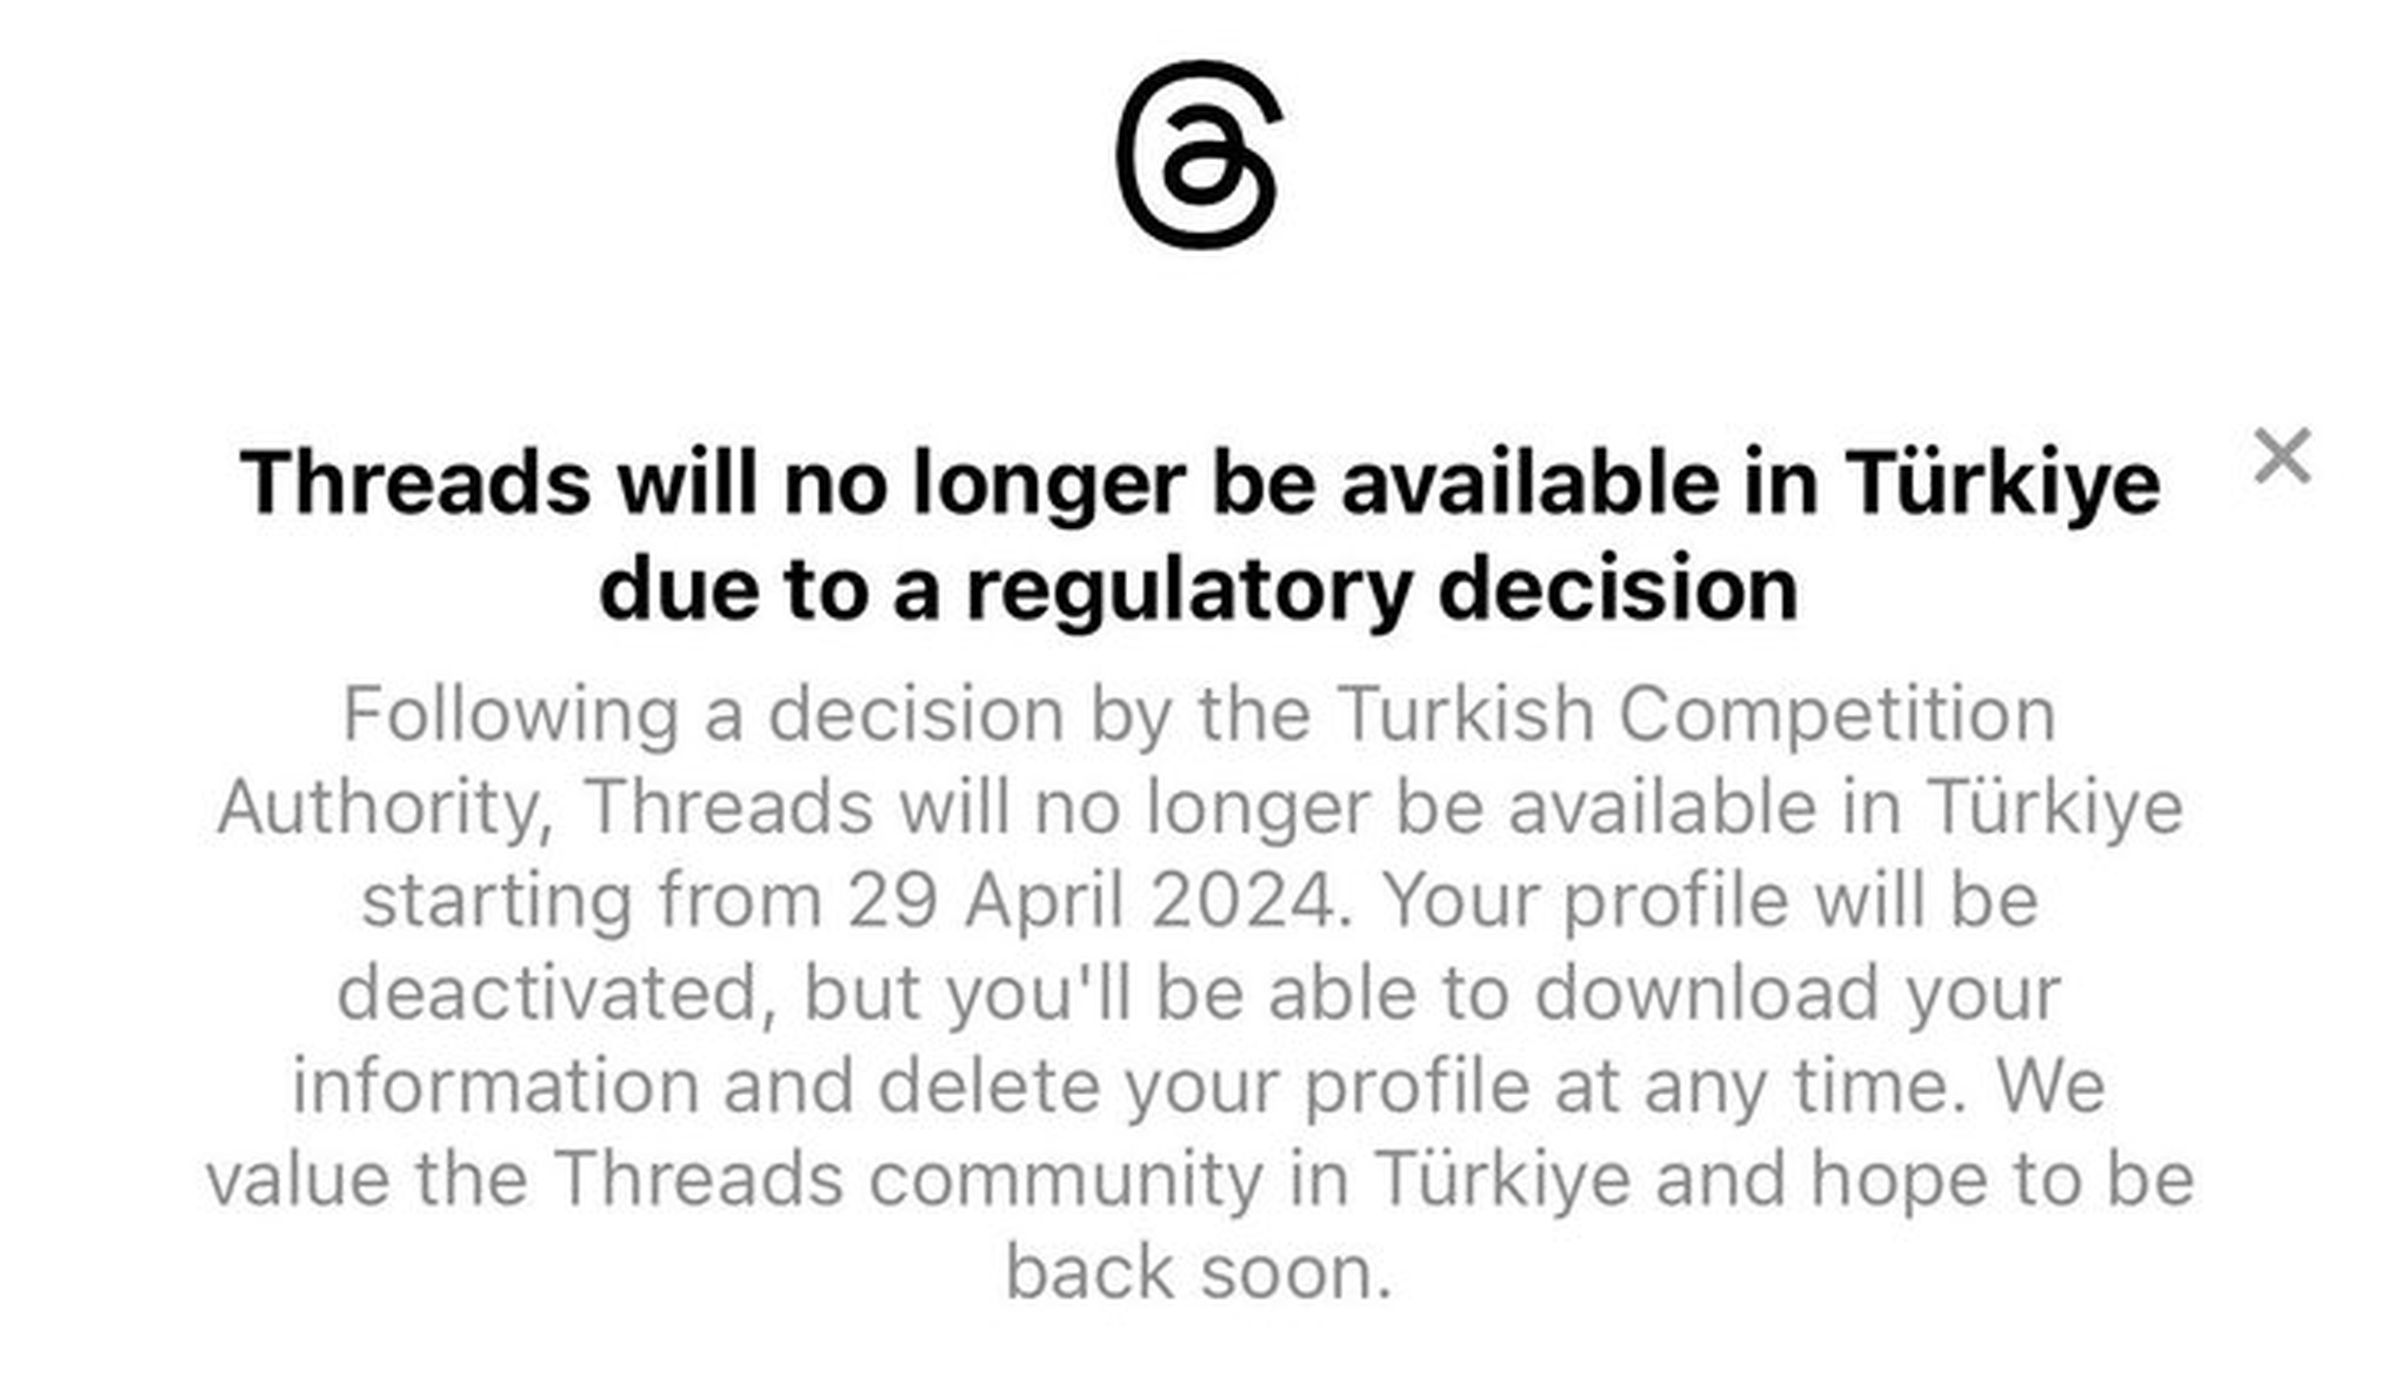 Following a decision by the Turkish Competition Authority, Threads will no longer be available in Türkiye starting from 29 April 2024. Your profile will be deactivated, but you’ll be able to download your information and delete your profile at any time. We value the Threads community in Türkiye and hope to be back soon.